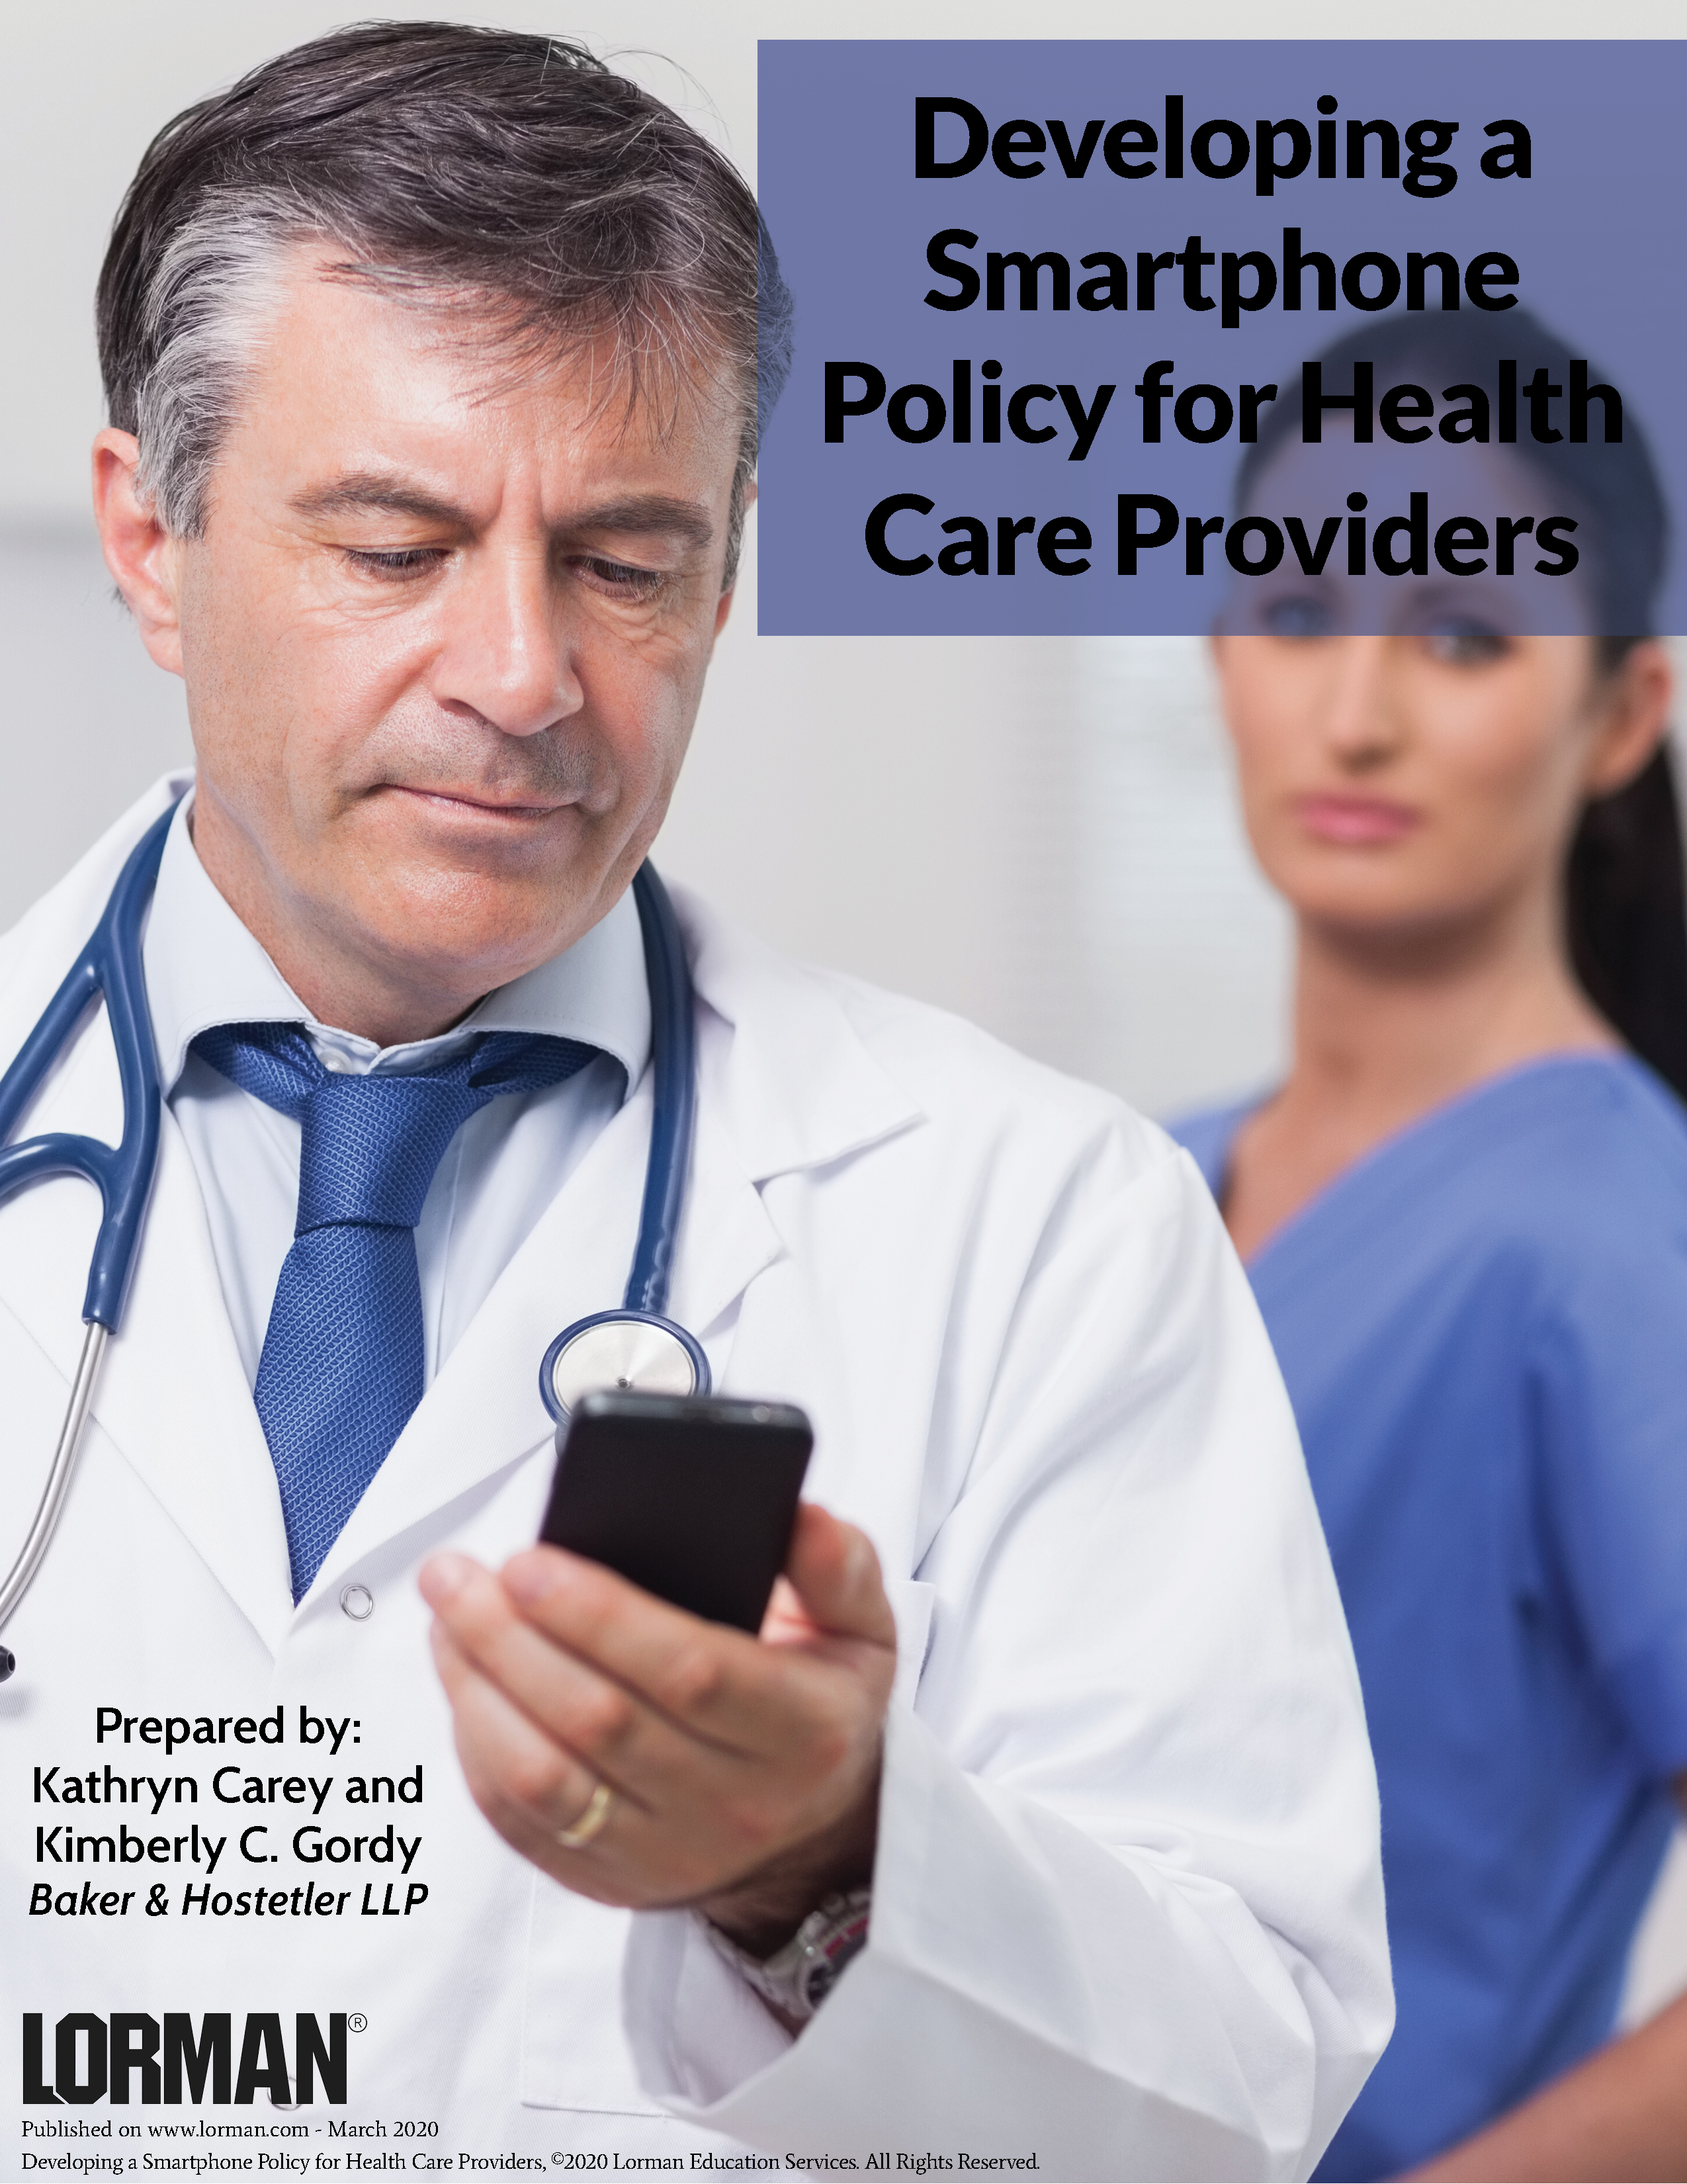 Developing a Smartphone Policy for Health Care Providers